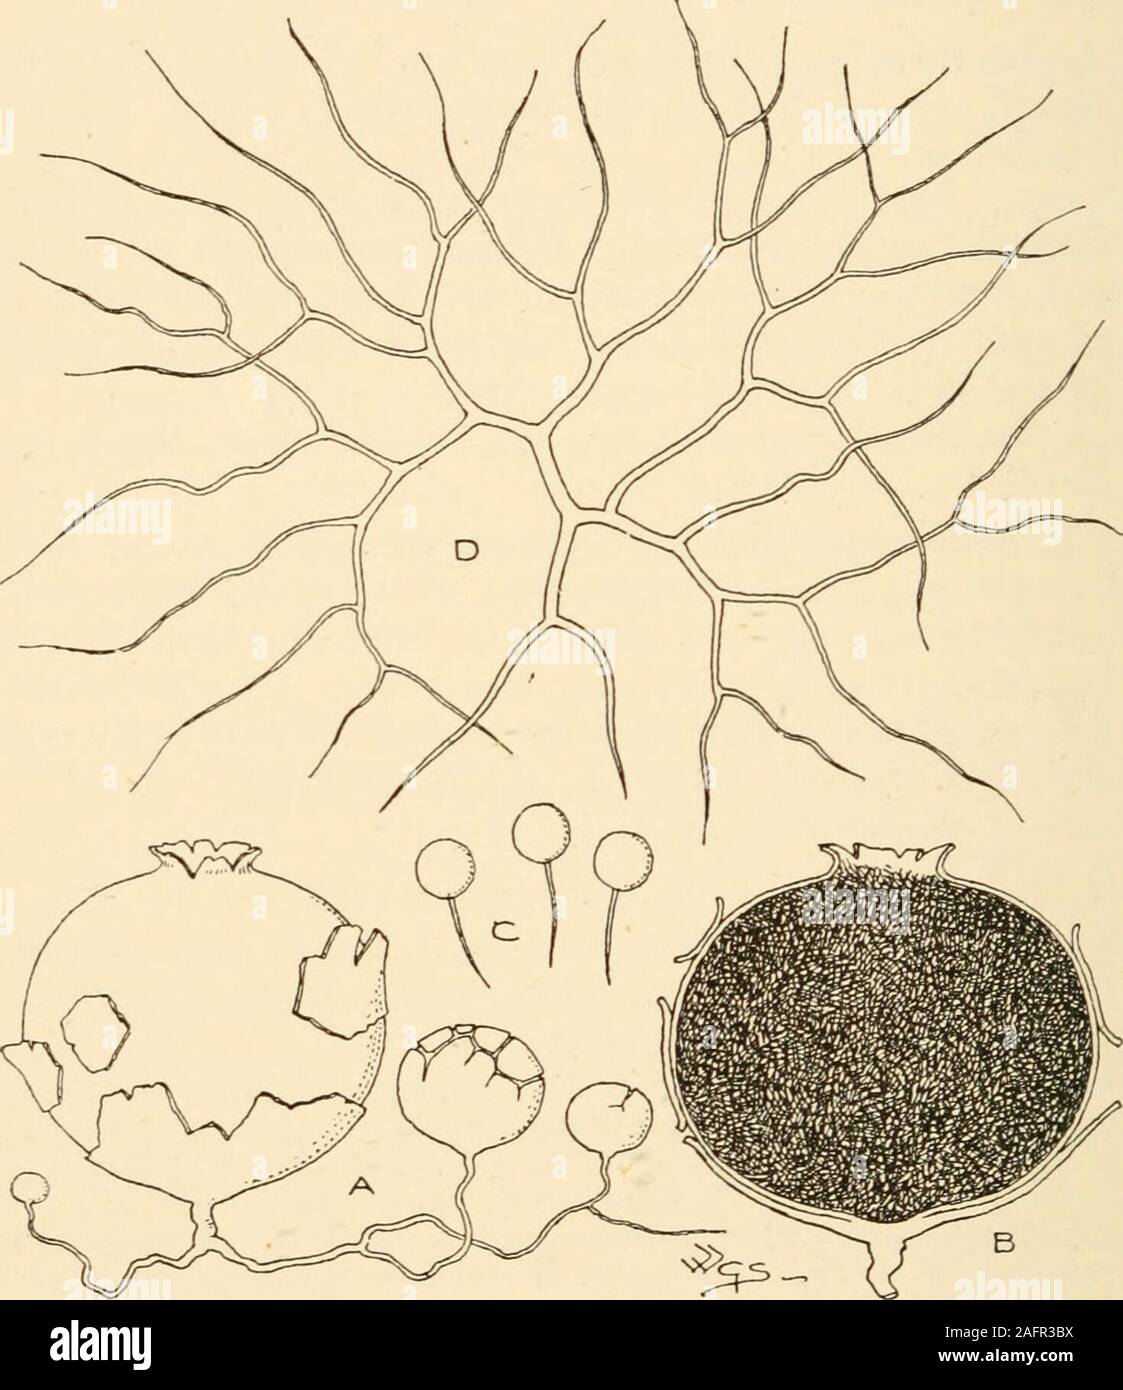 . Synopsis of the British Basidiomycetes ; a descriptive catalogue of the drawings and specimens in the Department of botany, British museum. with alarger diam. of 5 ft. 4 in. and a lesser of 4 ft. 6 in., height 9^ in. 2076. L. furfuraeeum Schaeff. (from the branny or scurfy peridium ;furfur, bran) a b c. Pe. subglobose, passing into a short, stout stem, flaccid above,floccose, white then pale olive-yellowish, base white. Cap.and Spores olivaceous. Sterile base spongy-cellular, white.Fields, fallow ground, old walls, about stumps. Sept. i|x ig in. 476 LYCOPERDACEjE Ly coper don 2011. L. Cookei Stock Photo